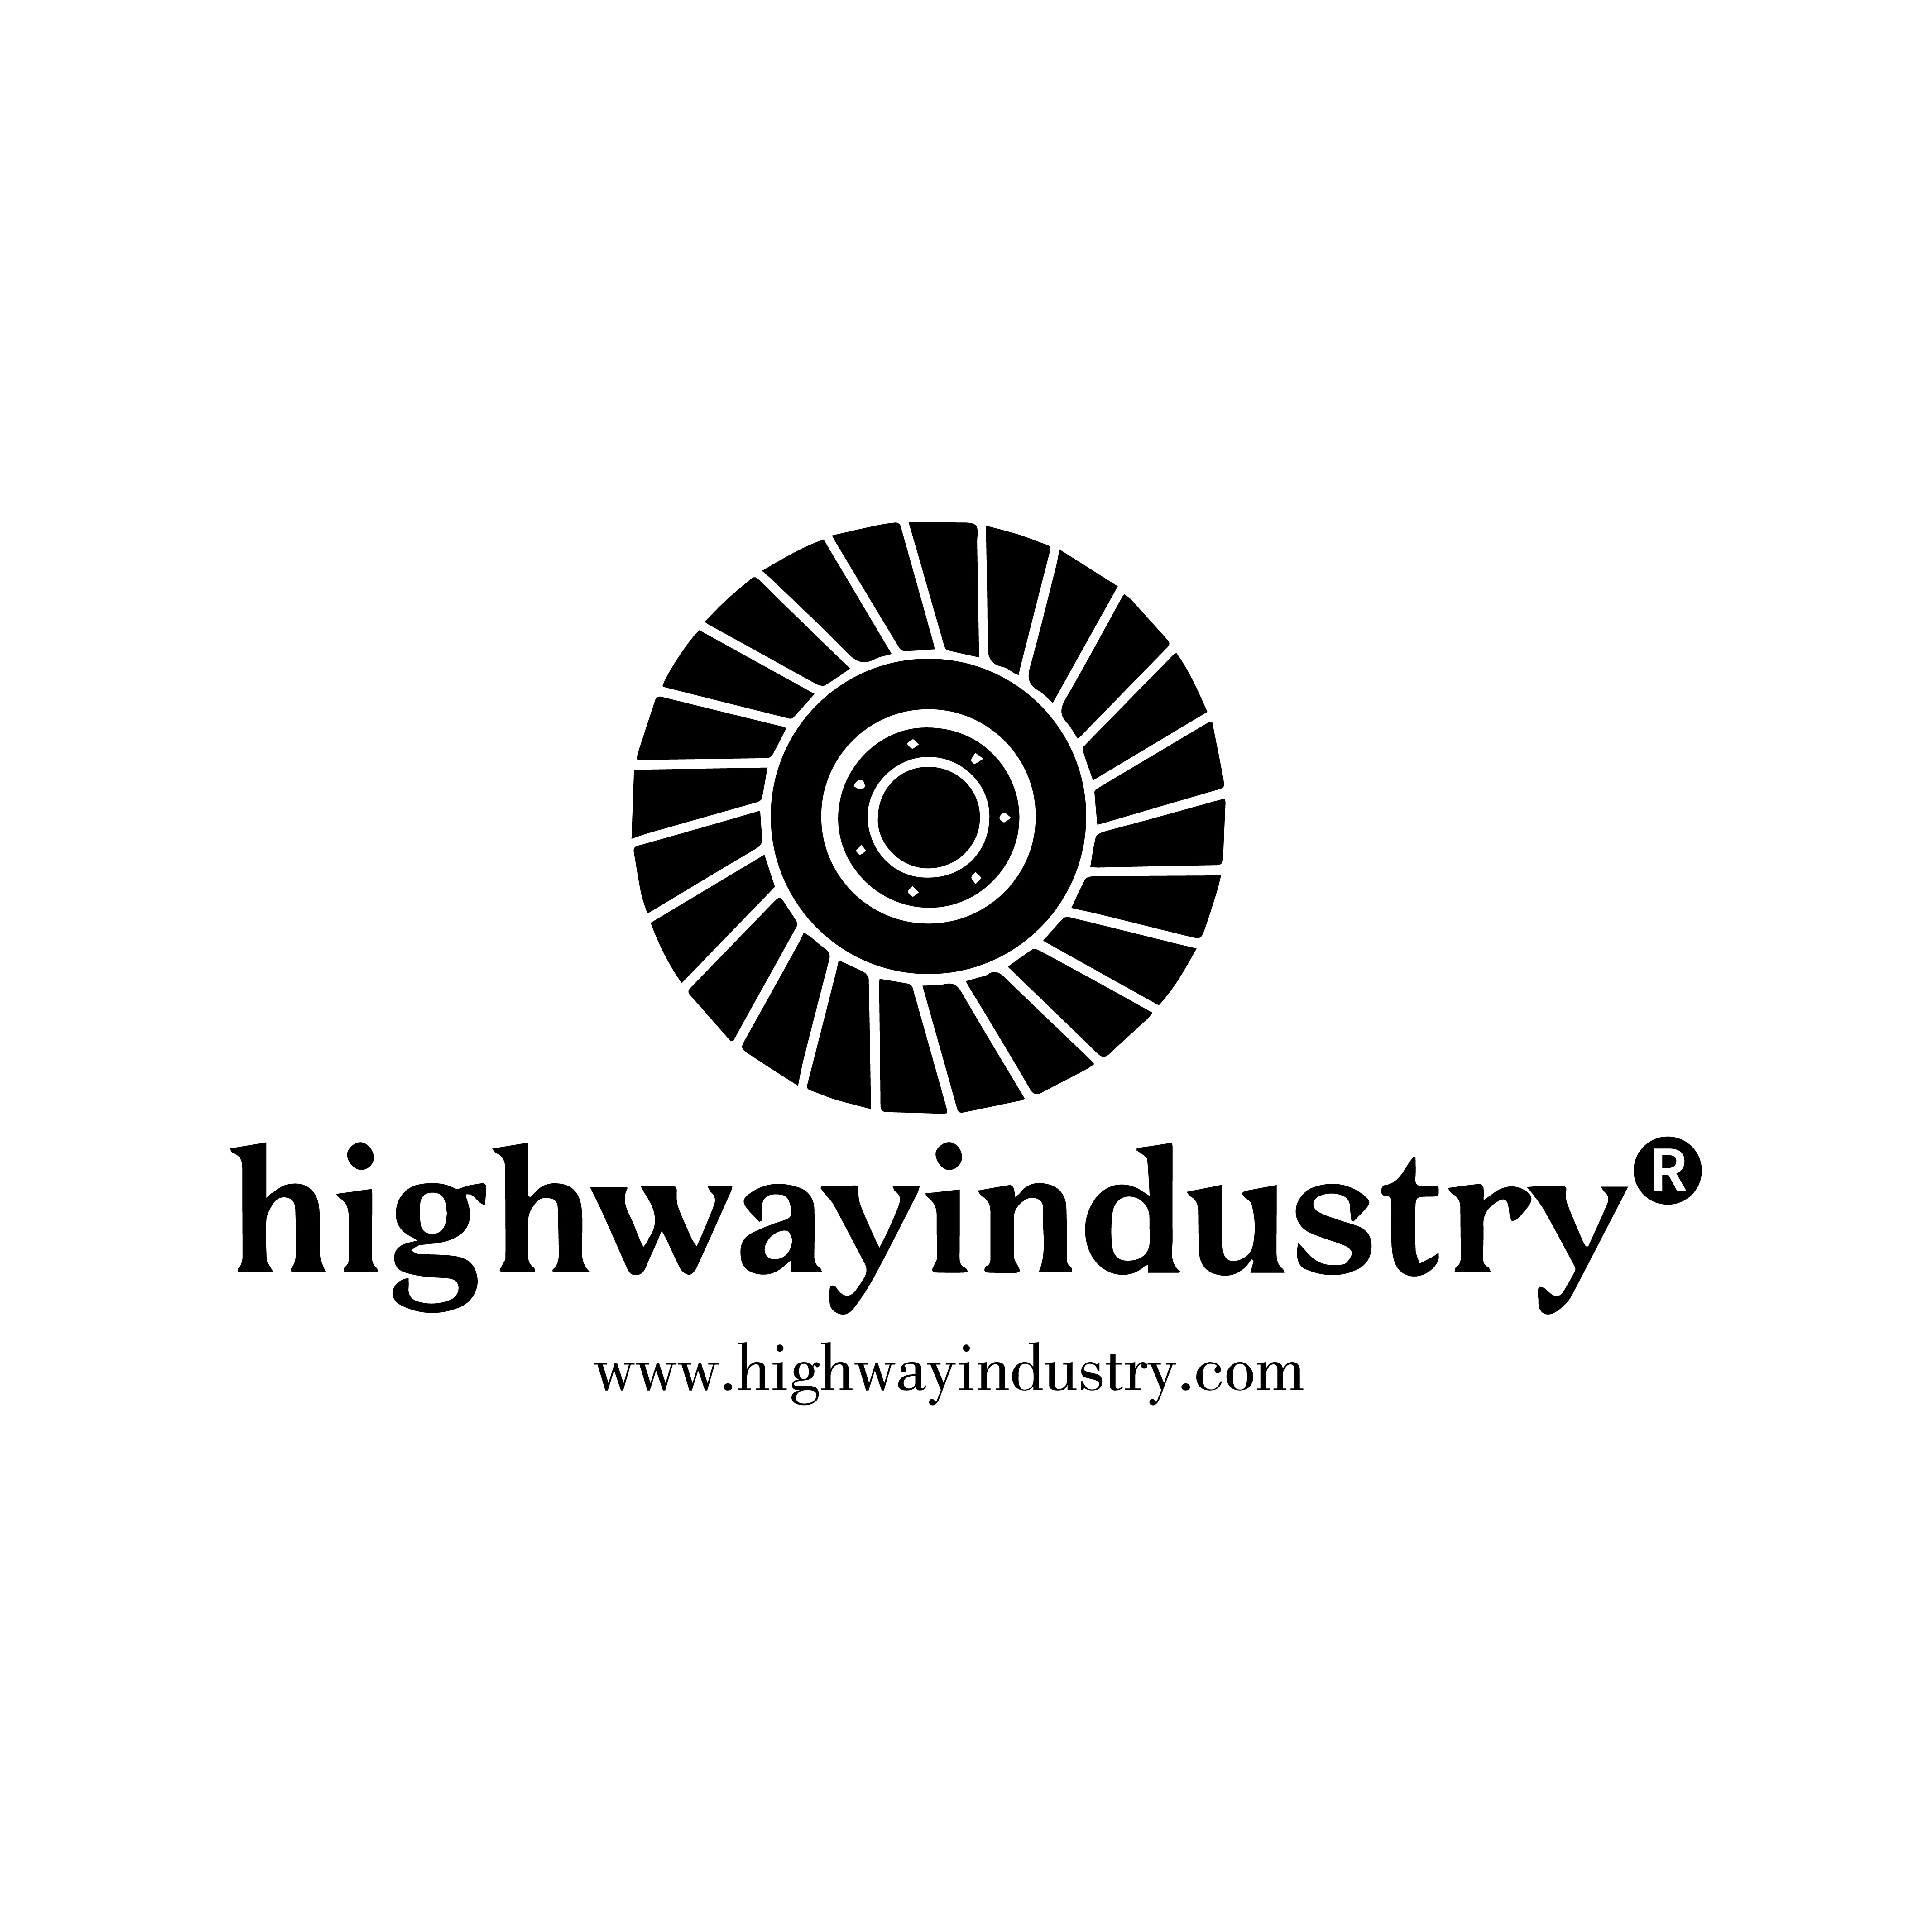 Foshan Highway Industry Company Limited